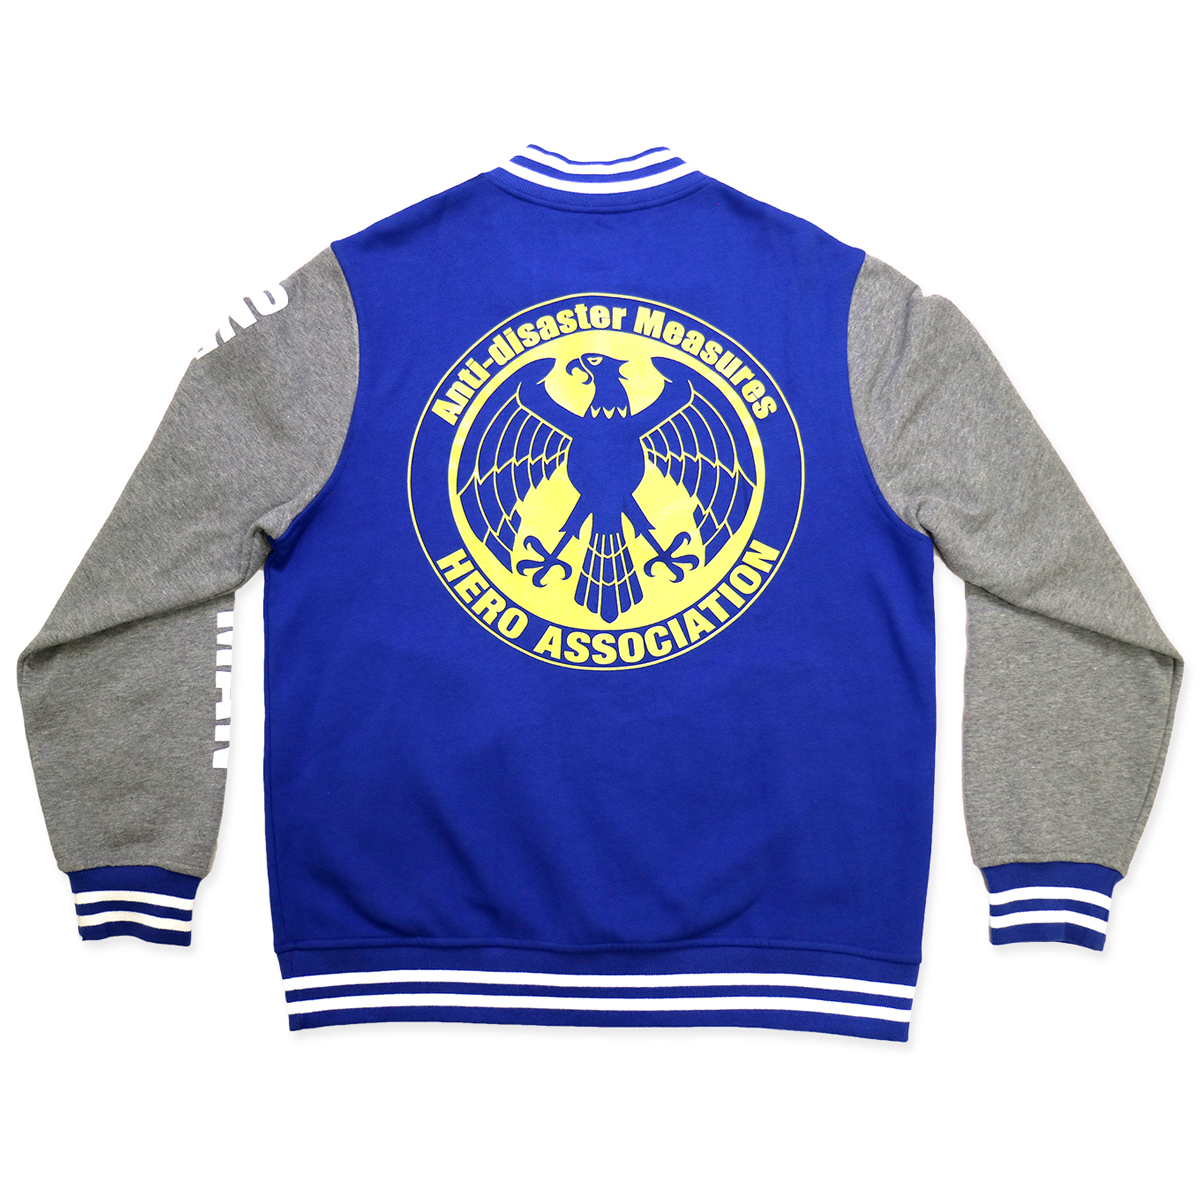 One-Punch Man Varsity Jacket [Mar 2021 Delivery]